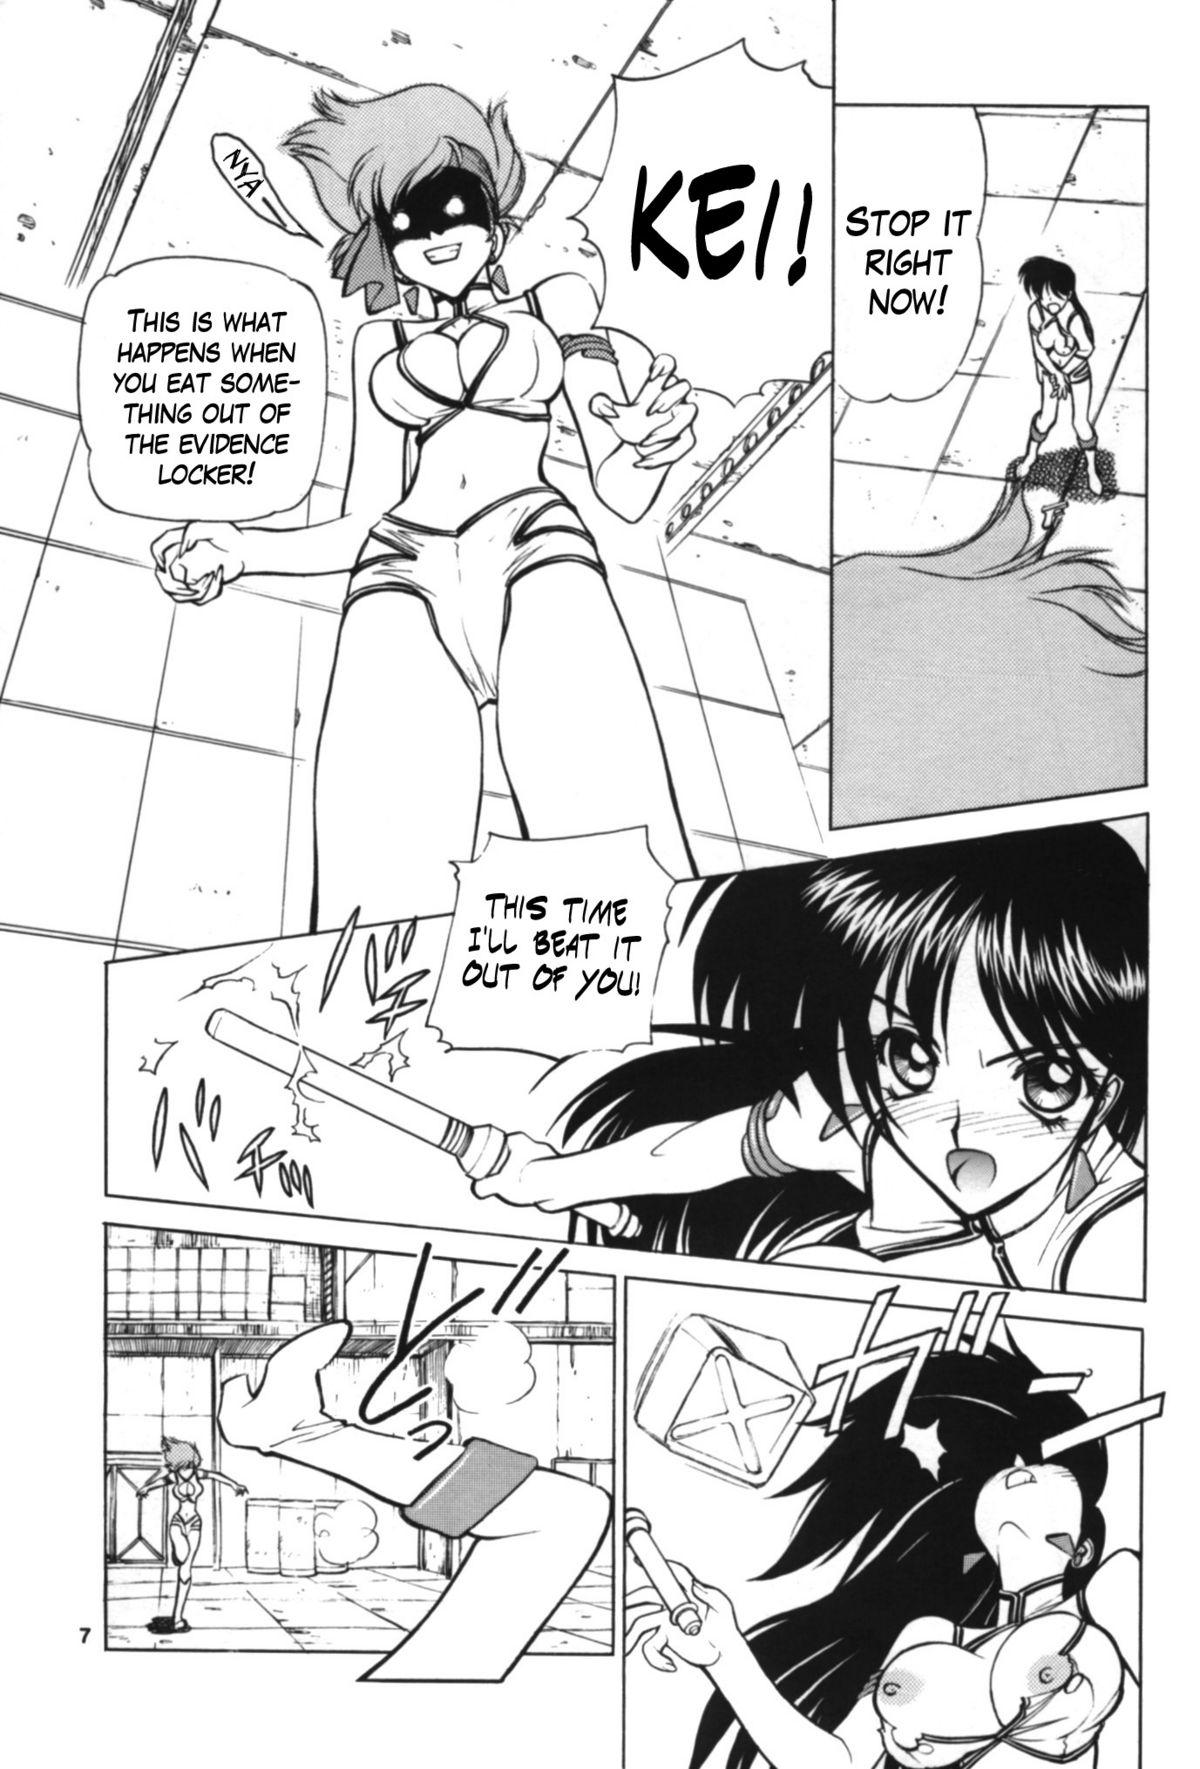 Celebrity Nudes NNDP 3 - Dirty pair Con - Page 7